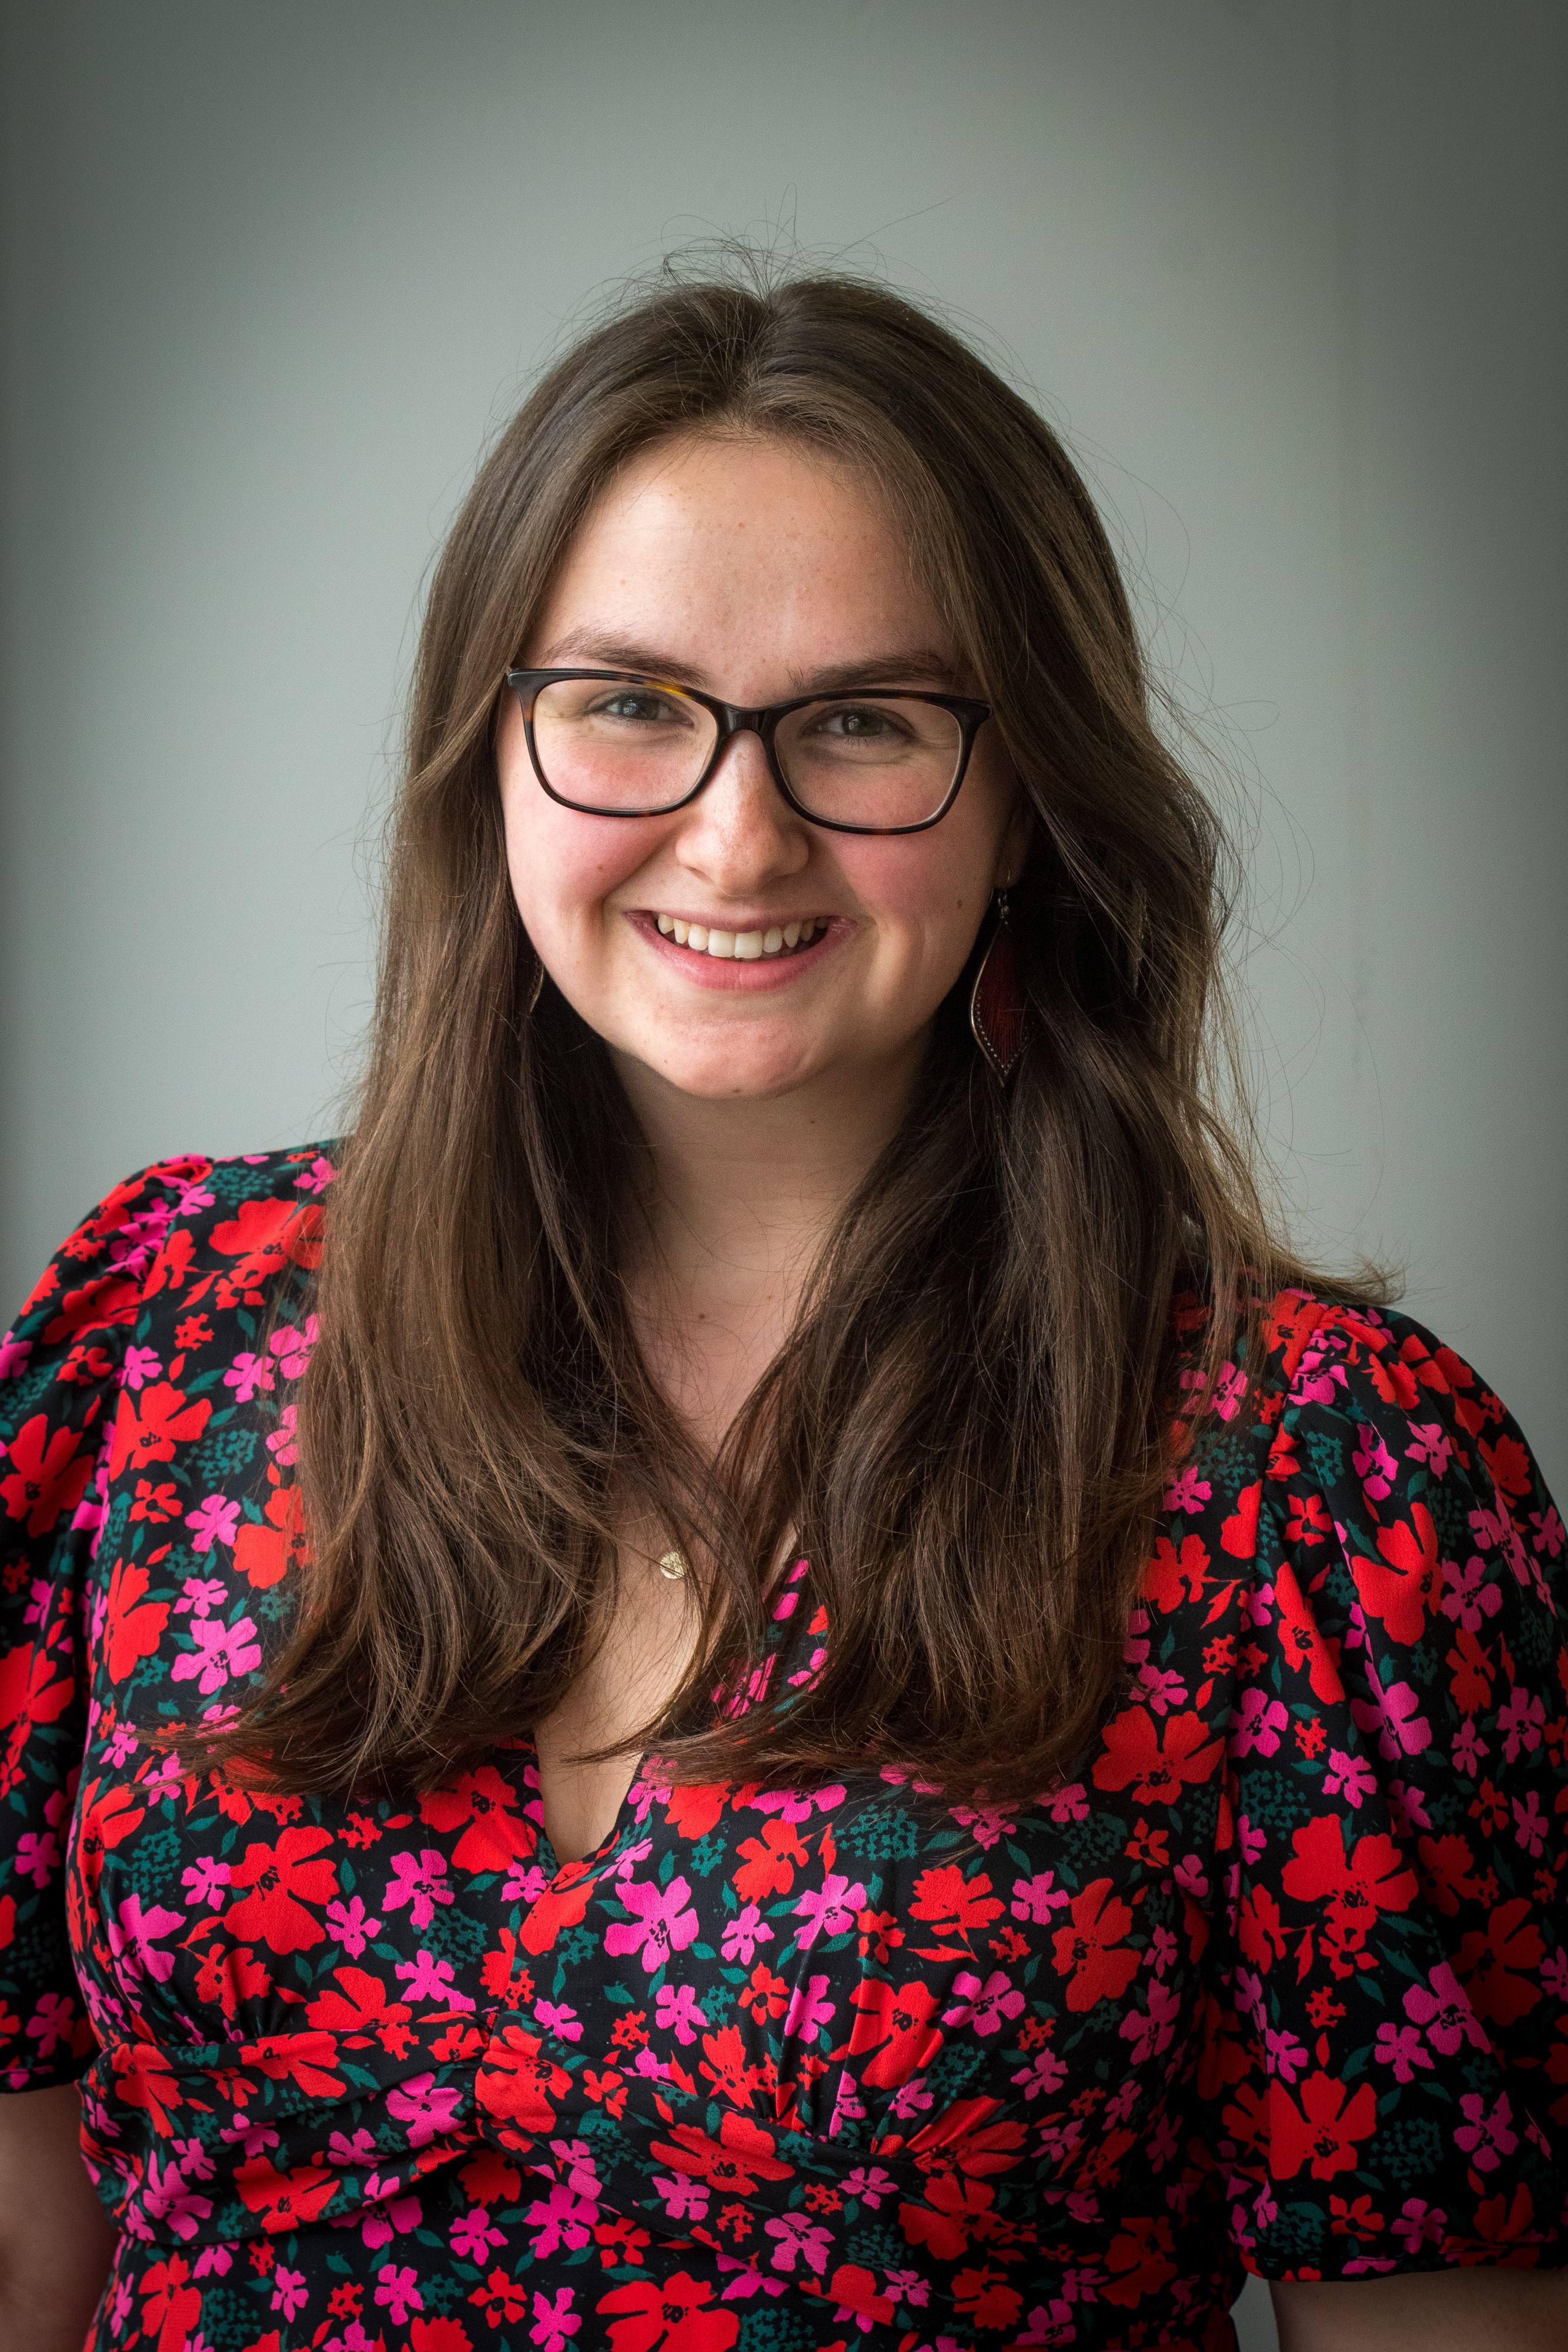 Kirstie is smiling head-on at the camera. There is a light grey background for her headshot. She is a white cis-gender woman, has chest-length brown hair, rectangular glasses, a round face, brown eyes, long red earrings, and is wearing a multi-coloured floral dress.